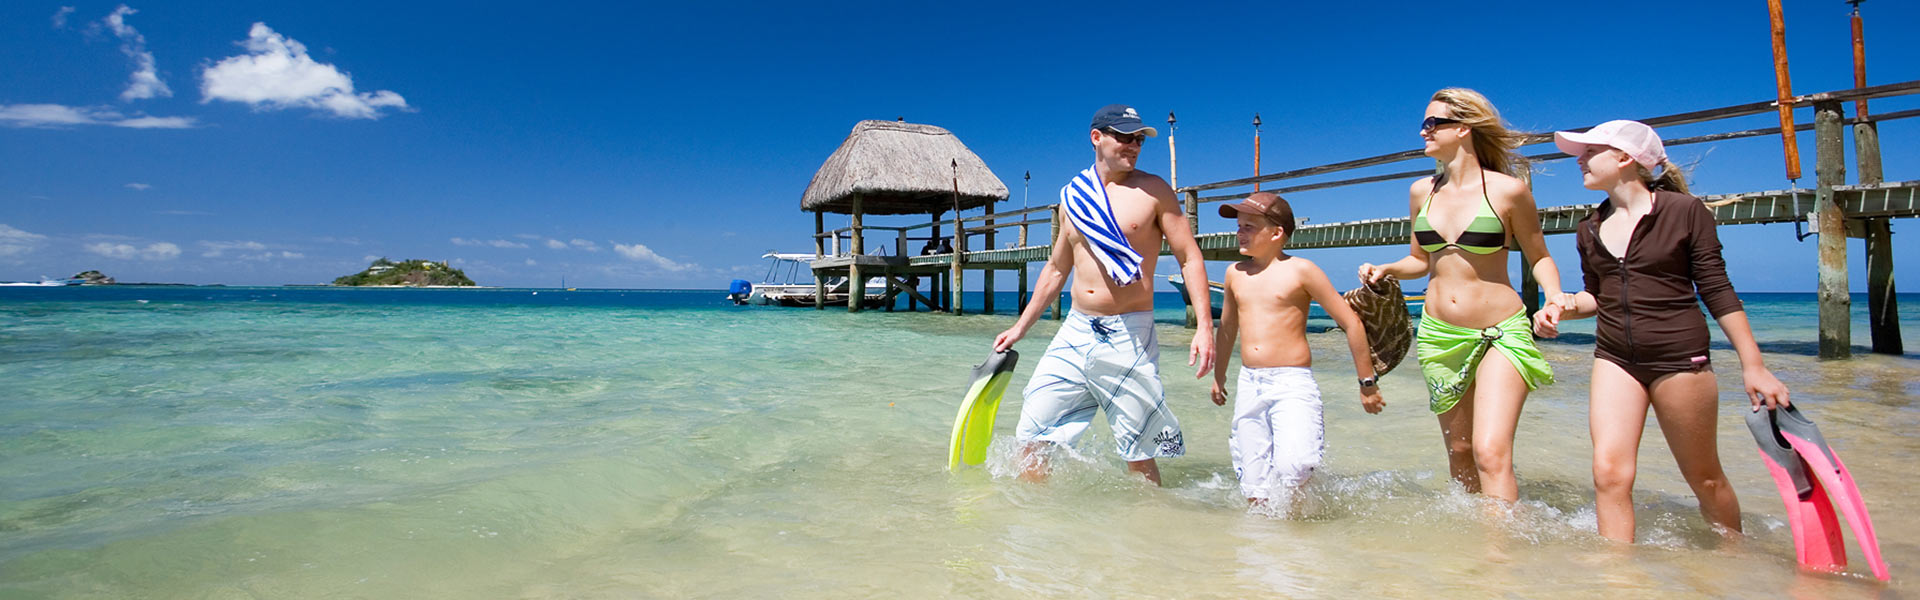 Stay 6 Nights and Experience Luxury with Fiji Gateway Hotel and Malolo Island Resort!